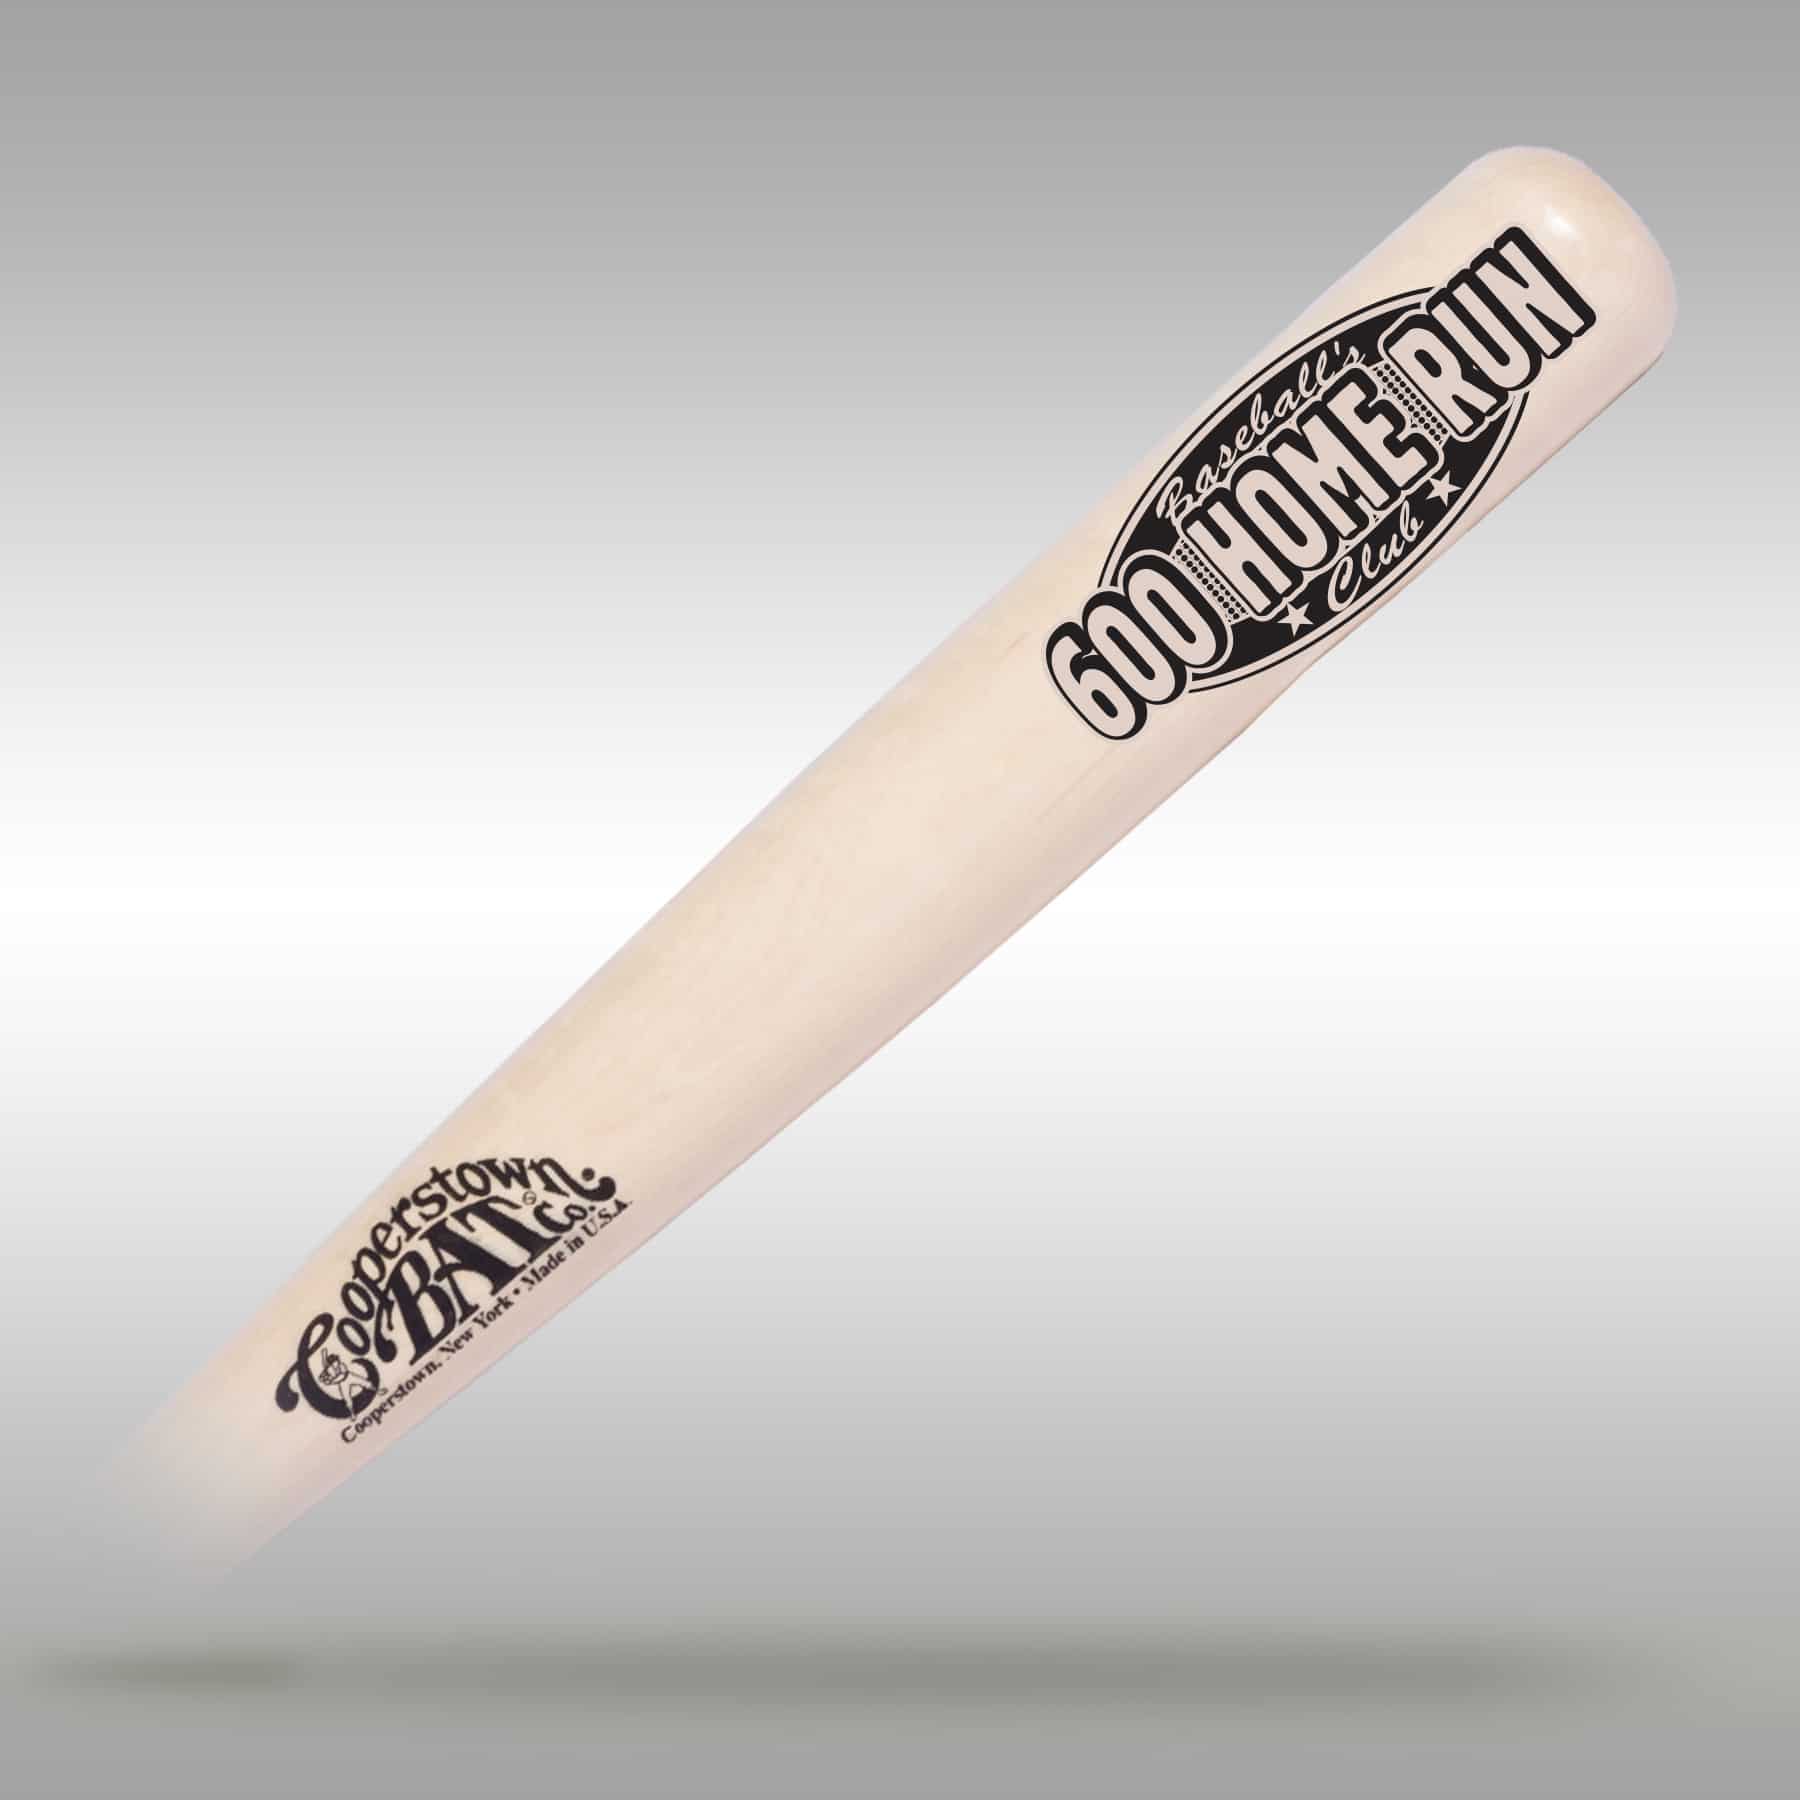 Baseball's Hitters Club Engraved Bats - Cooperstown Bat Company